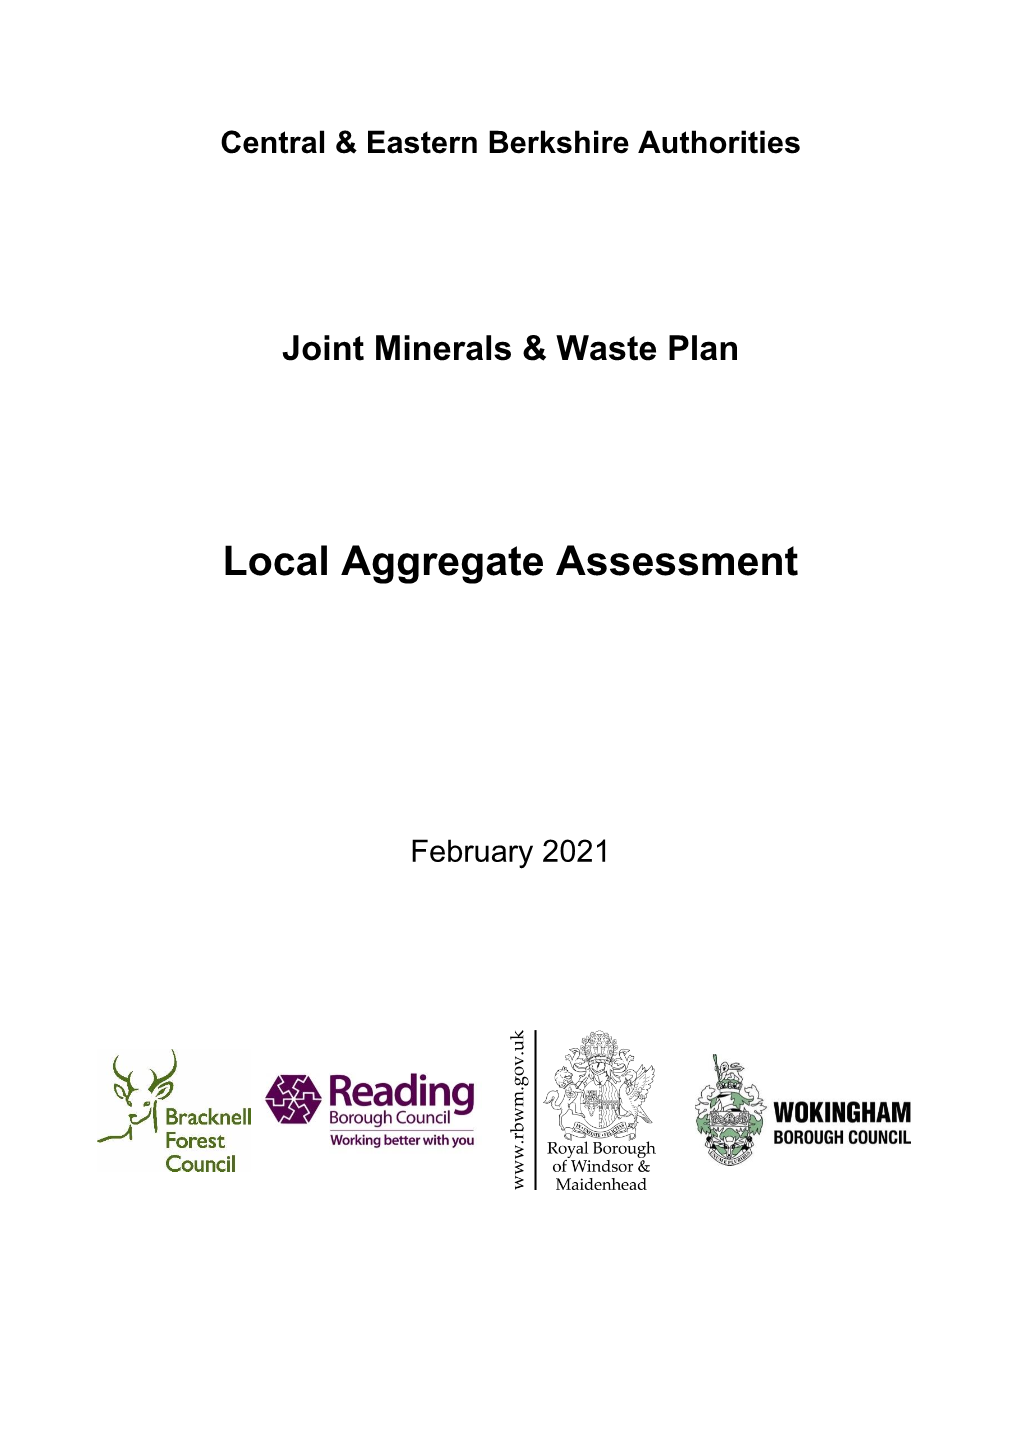 Local Aggregate Assessment